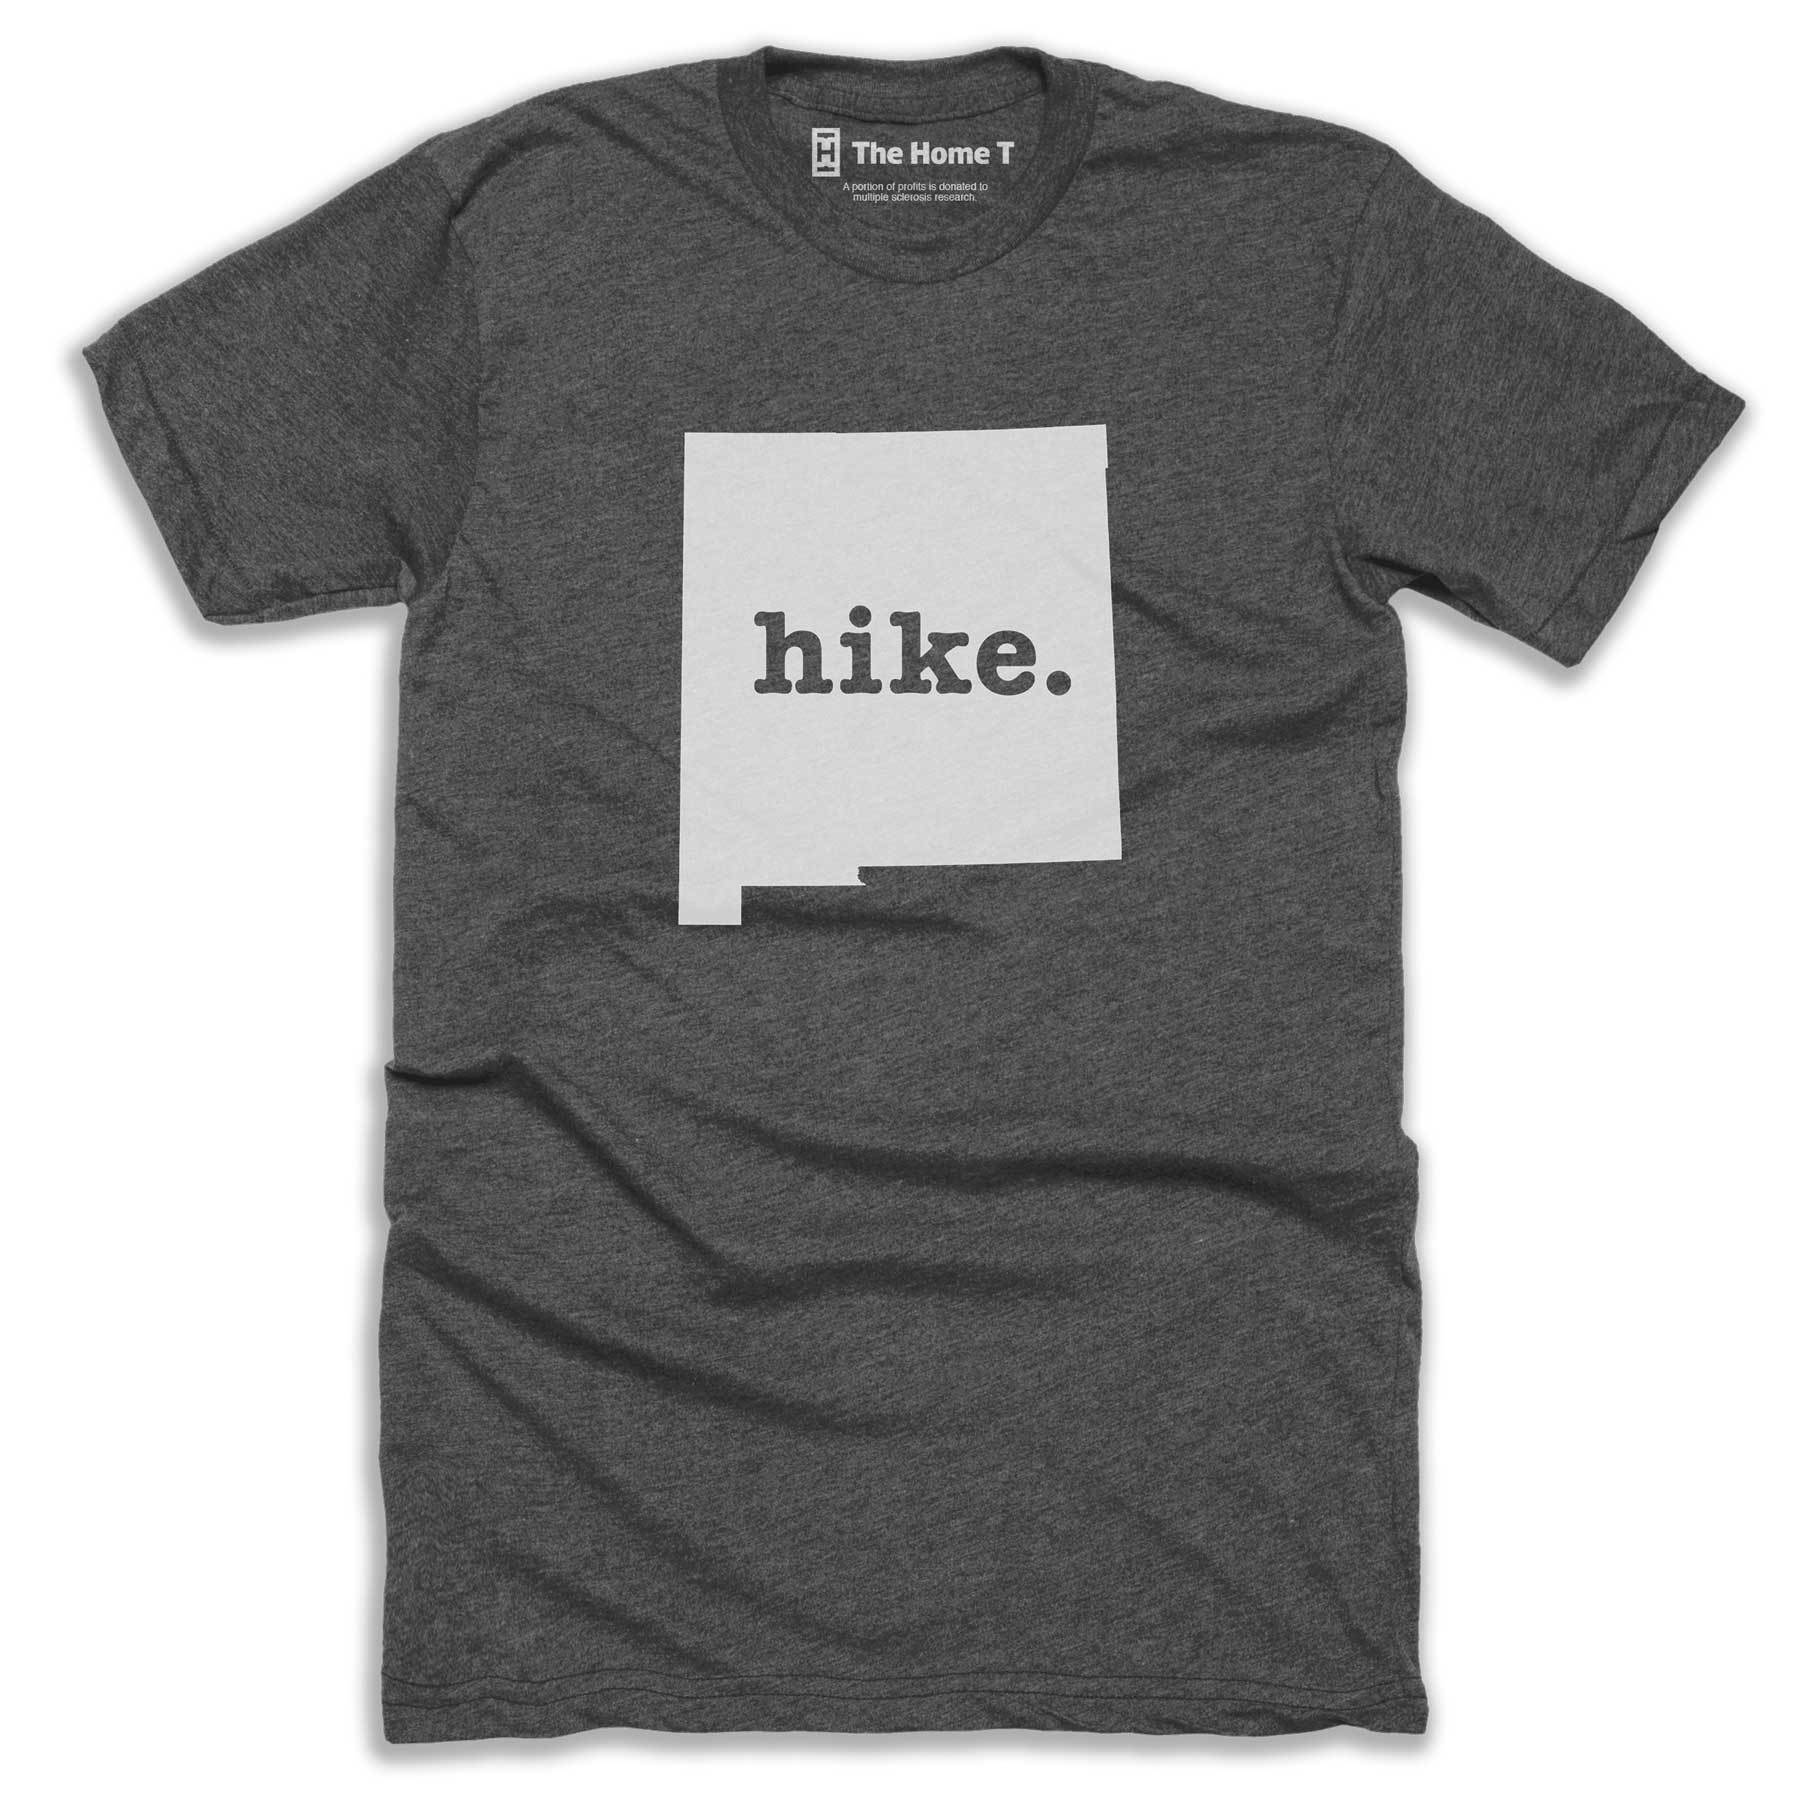 New Mexico Hike Home T-Shirt Outdoor Collection The Home T XXL Grey